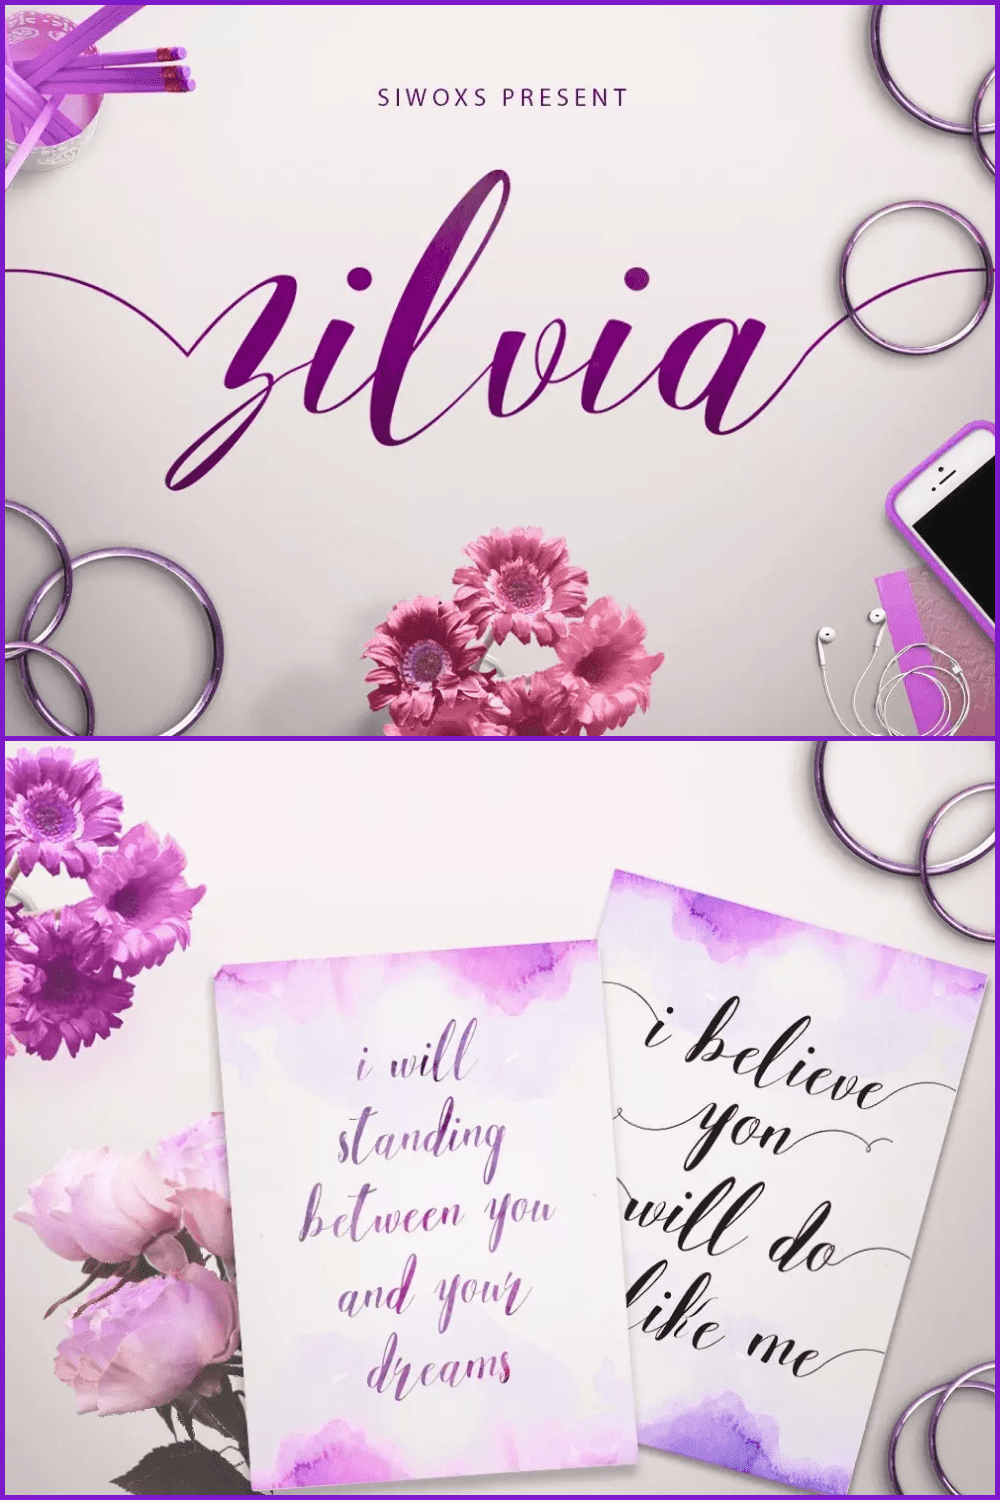 Words in purple on delicate pink cards.